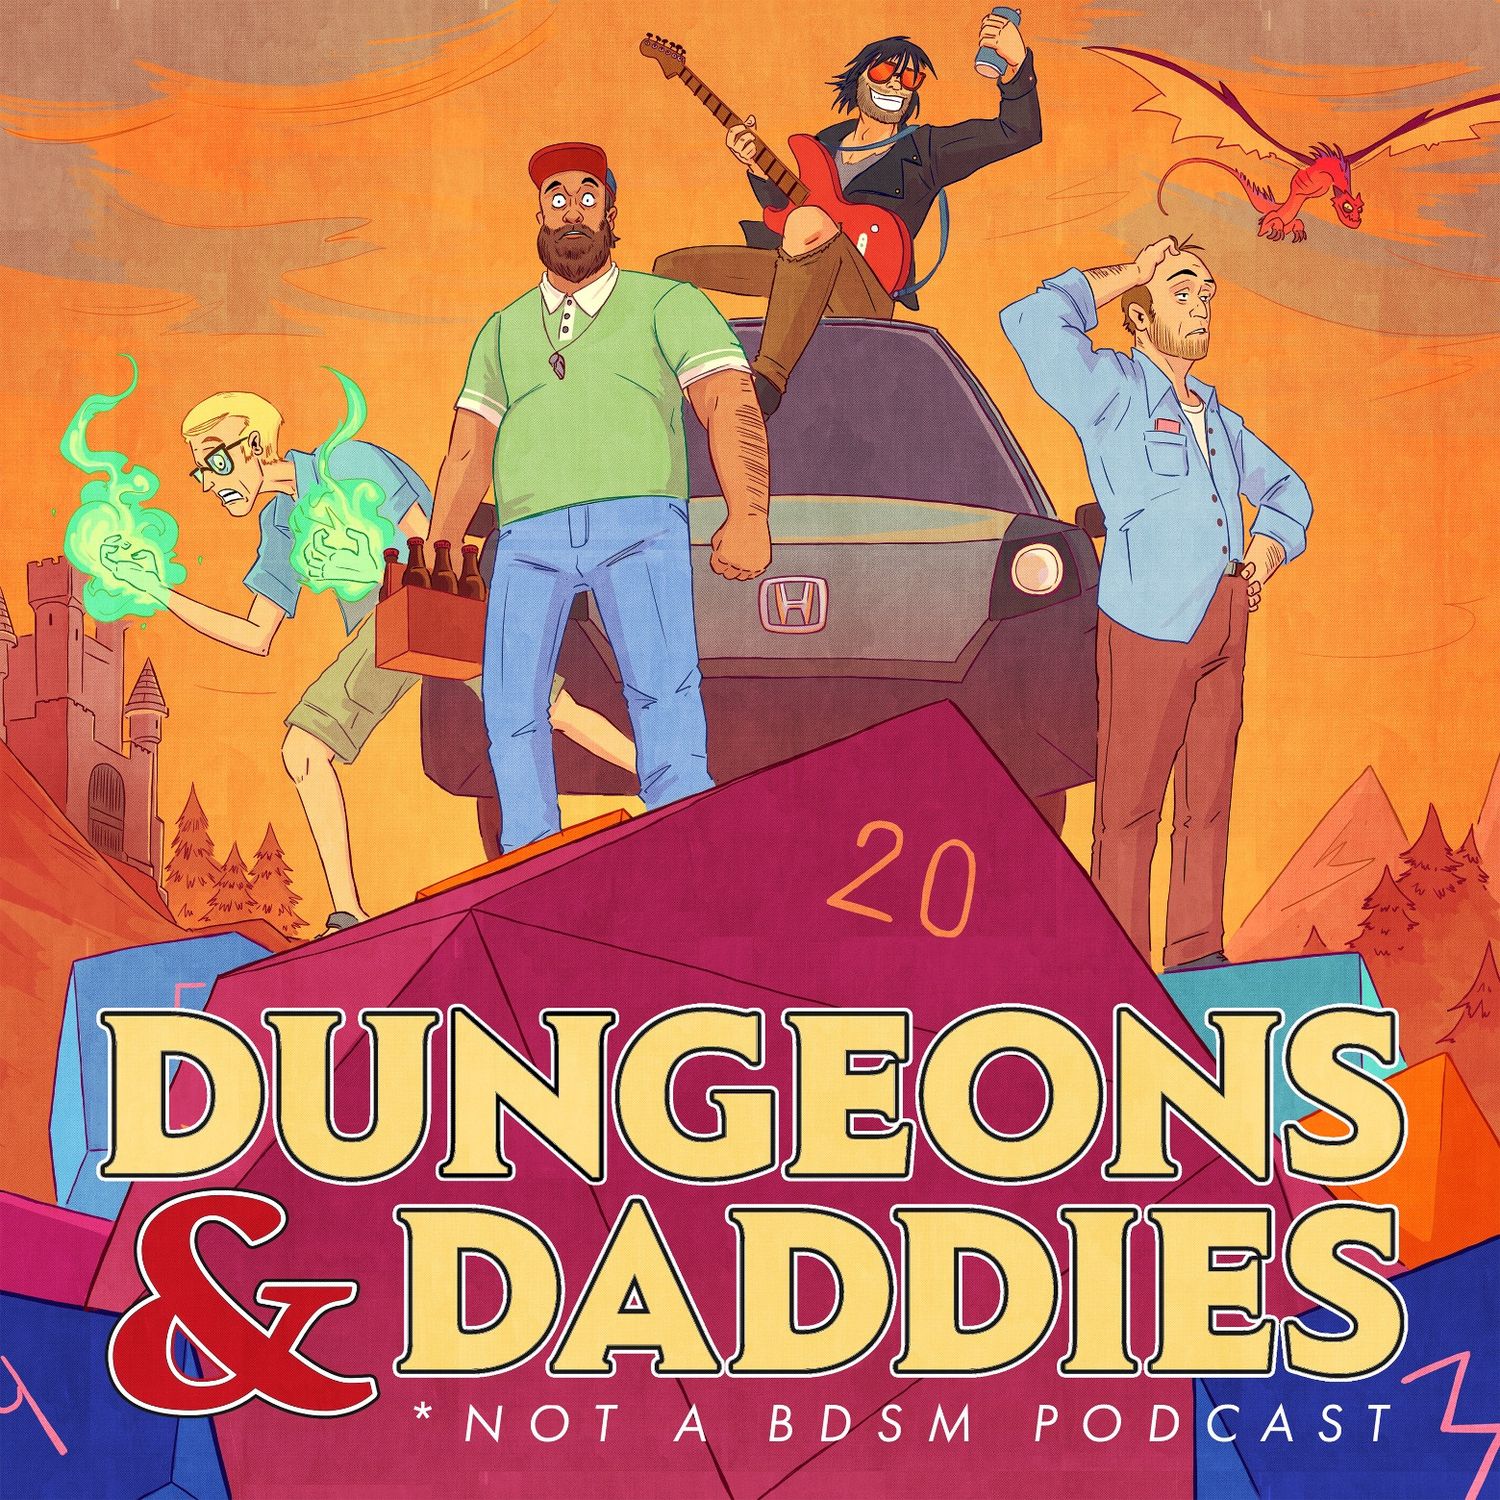 Dungeons and Daddies podcast